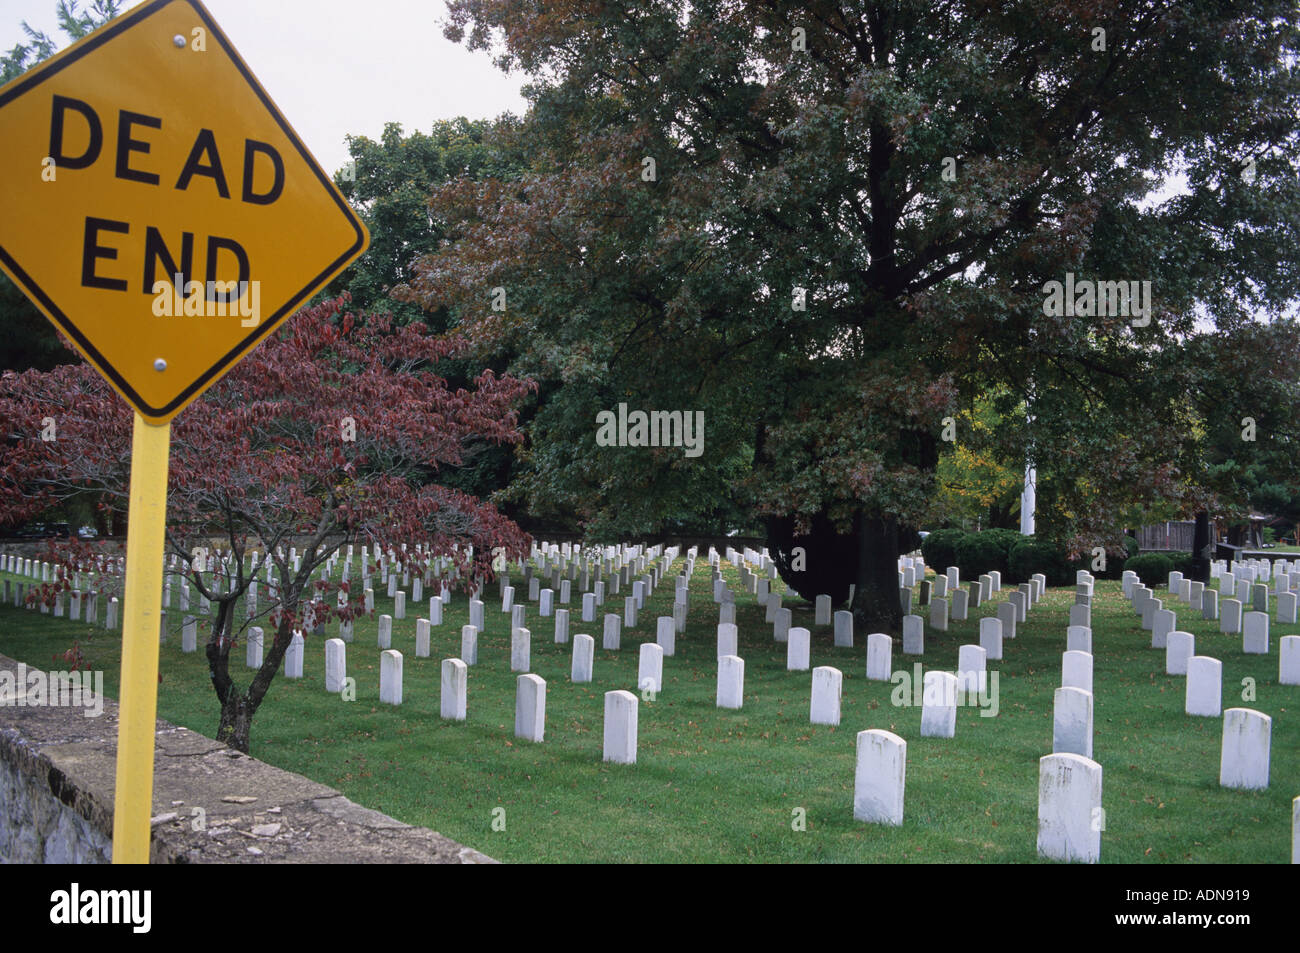 A civil war cemetery and dead end road sign in Staunton Virginia  Stock Photo